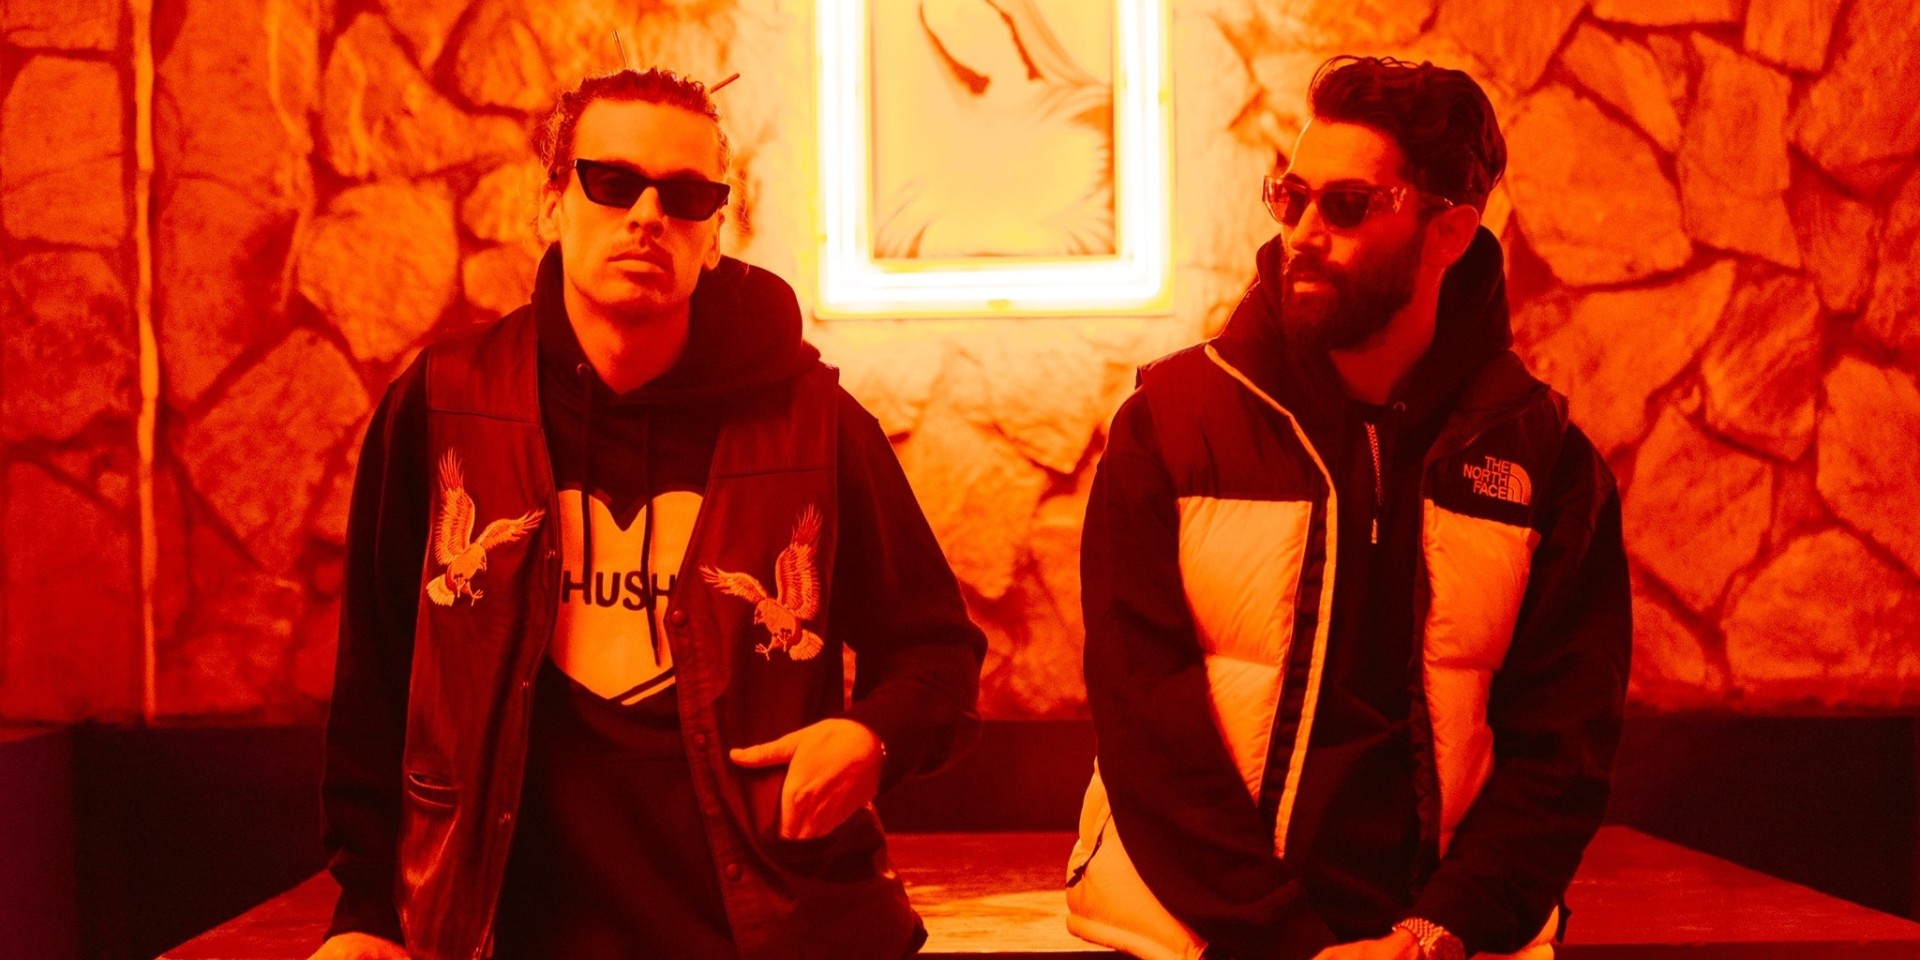 "Too many new bangers to name:" Yellow Claw on making more music as €URO TRA$H, Barong Family